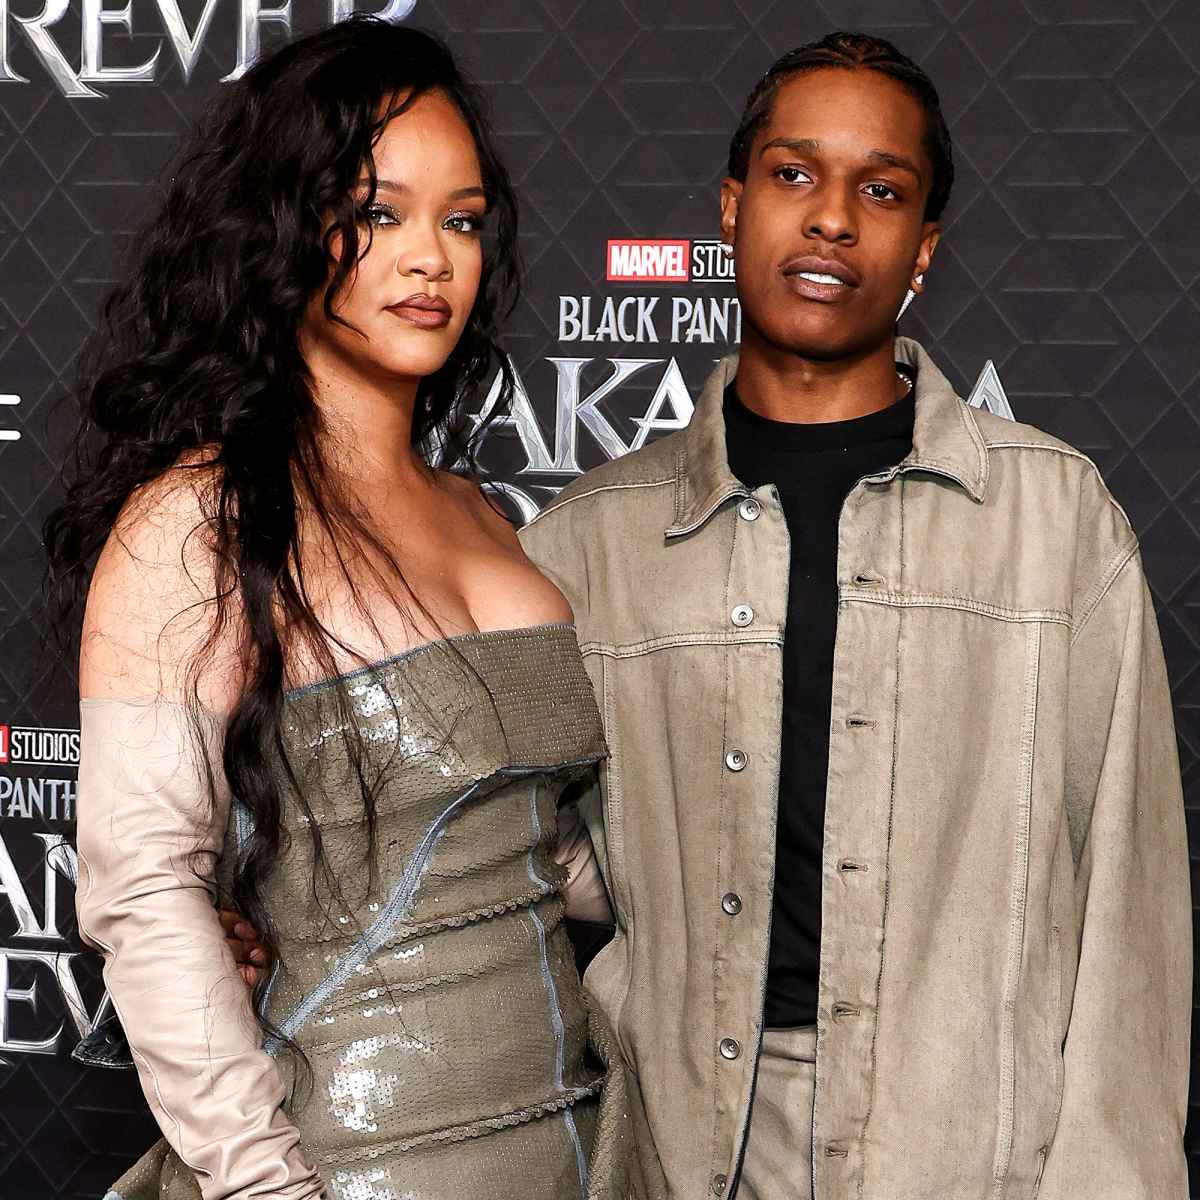 Rihanna and A$AP Rocky Enjoy Date Night In Barbados